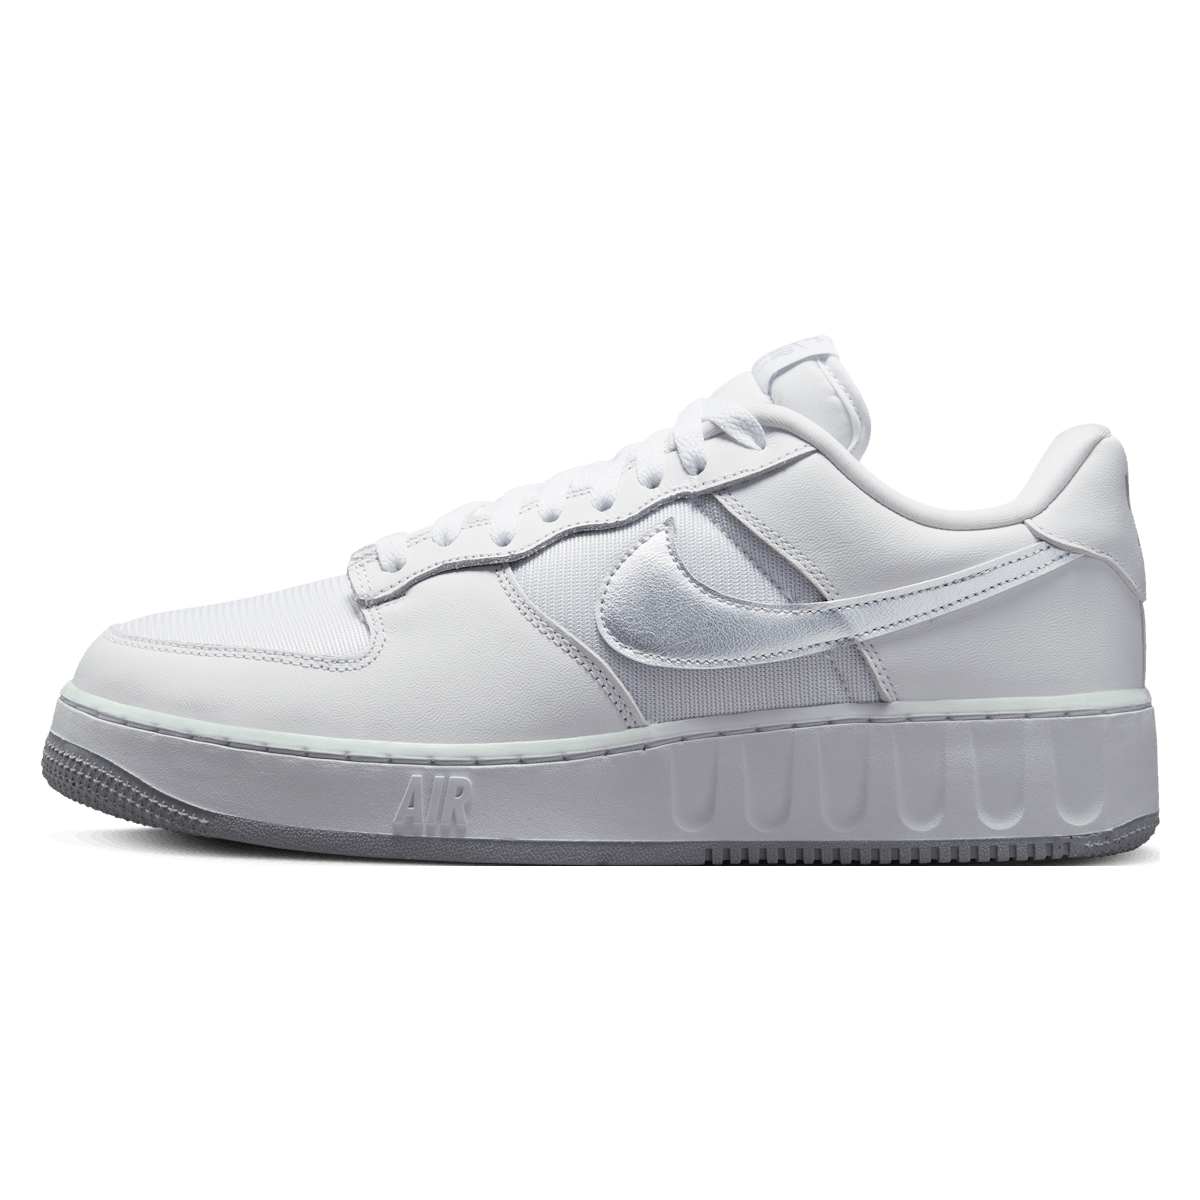 Nike Air Force 1 Low Unity "Pure Platinum"